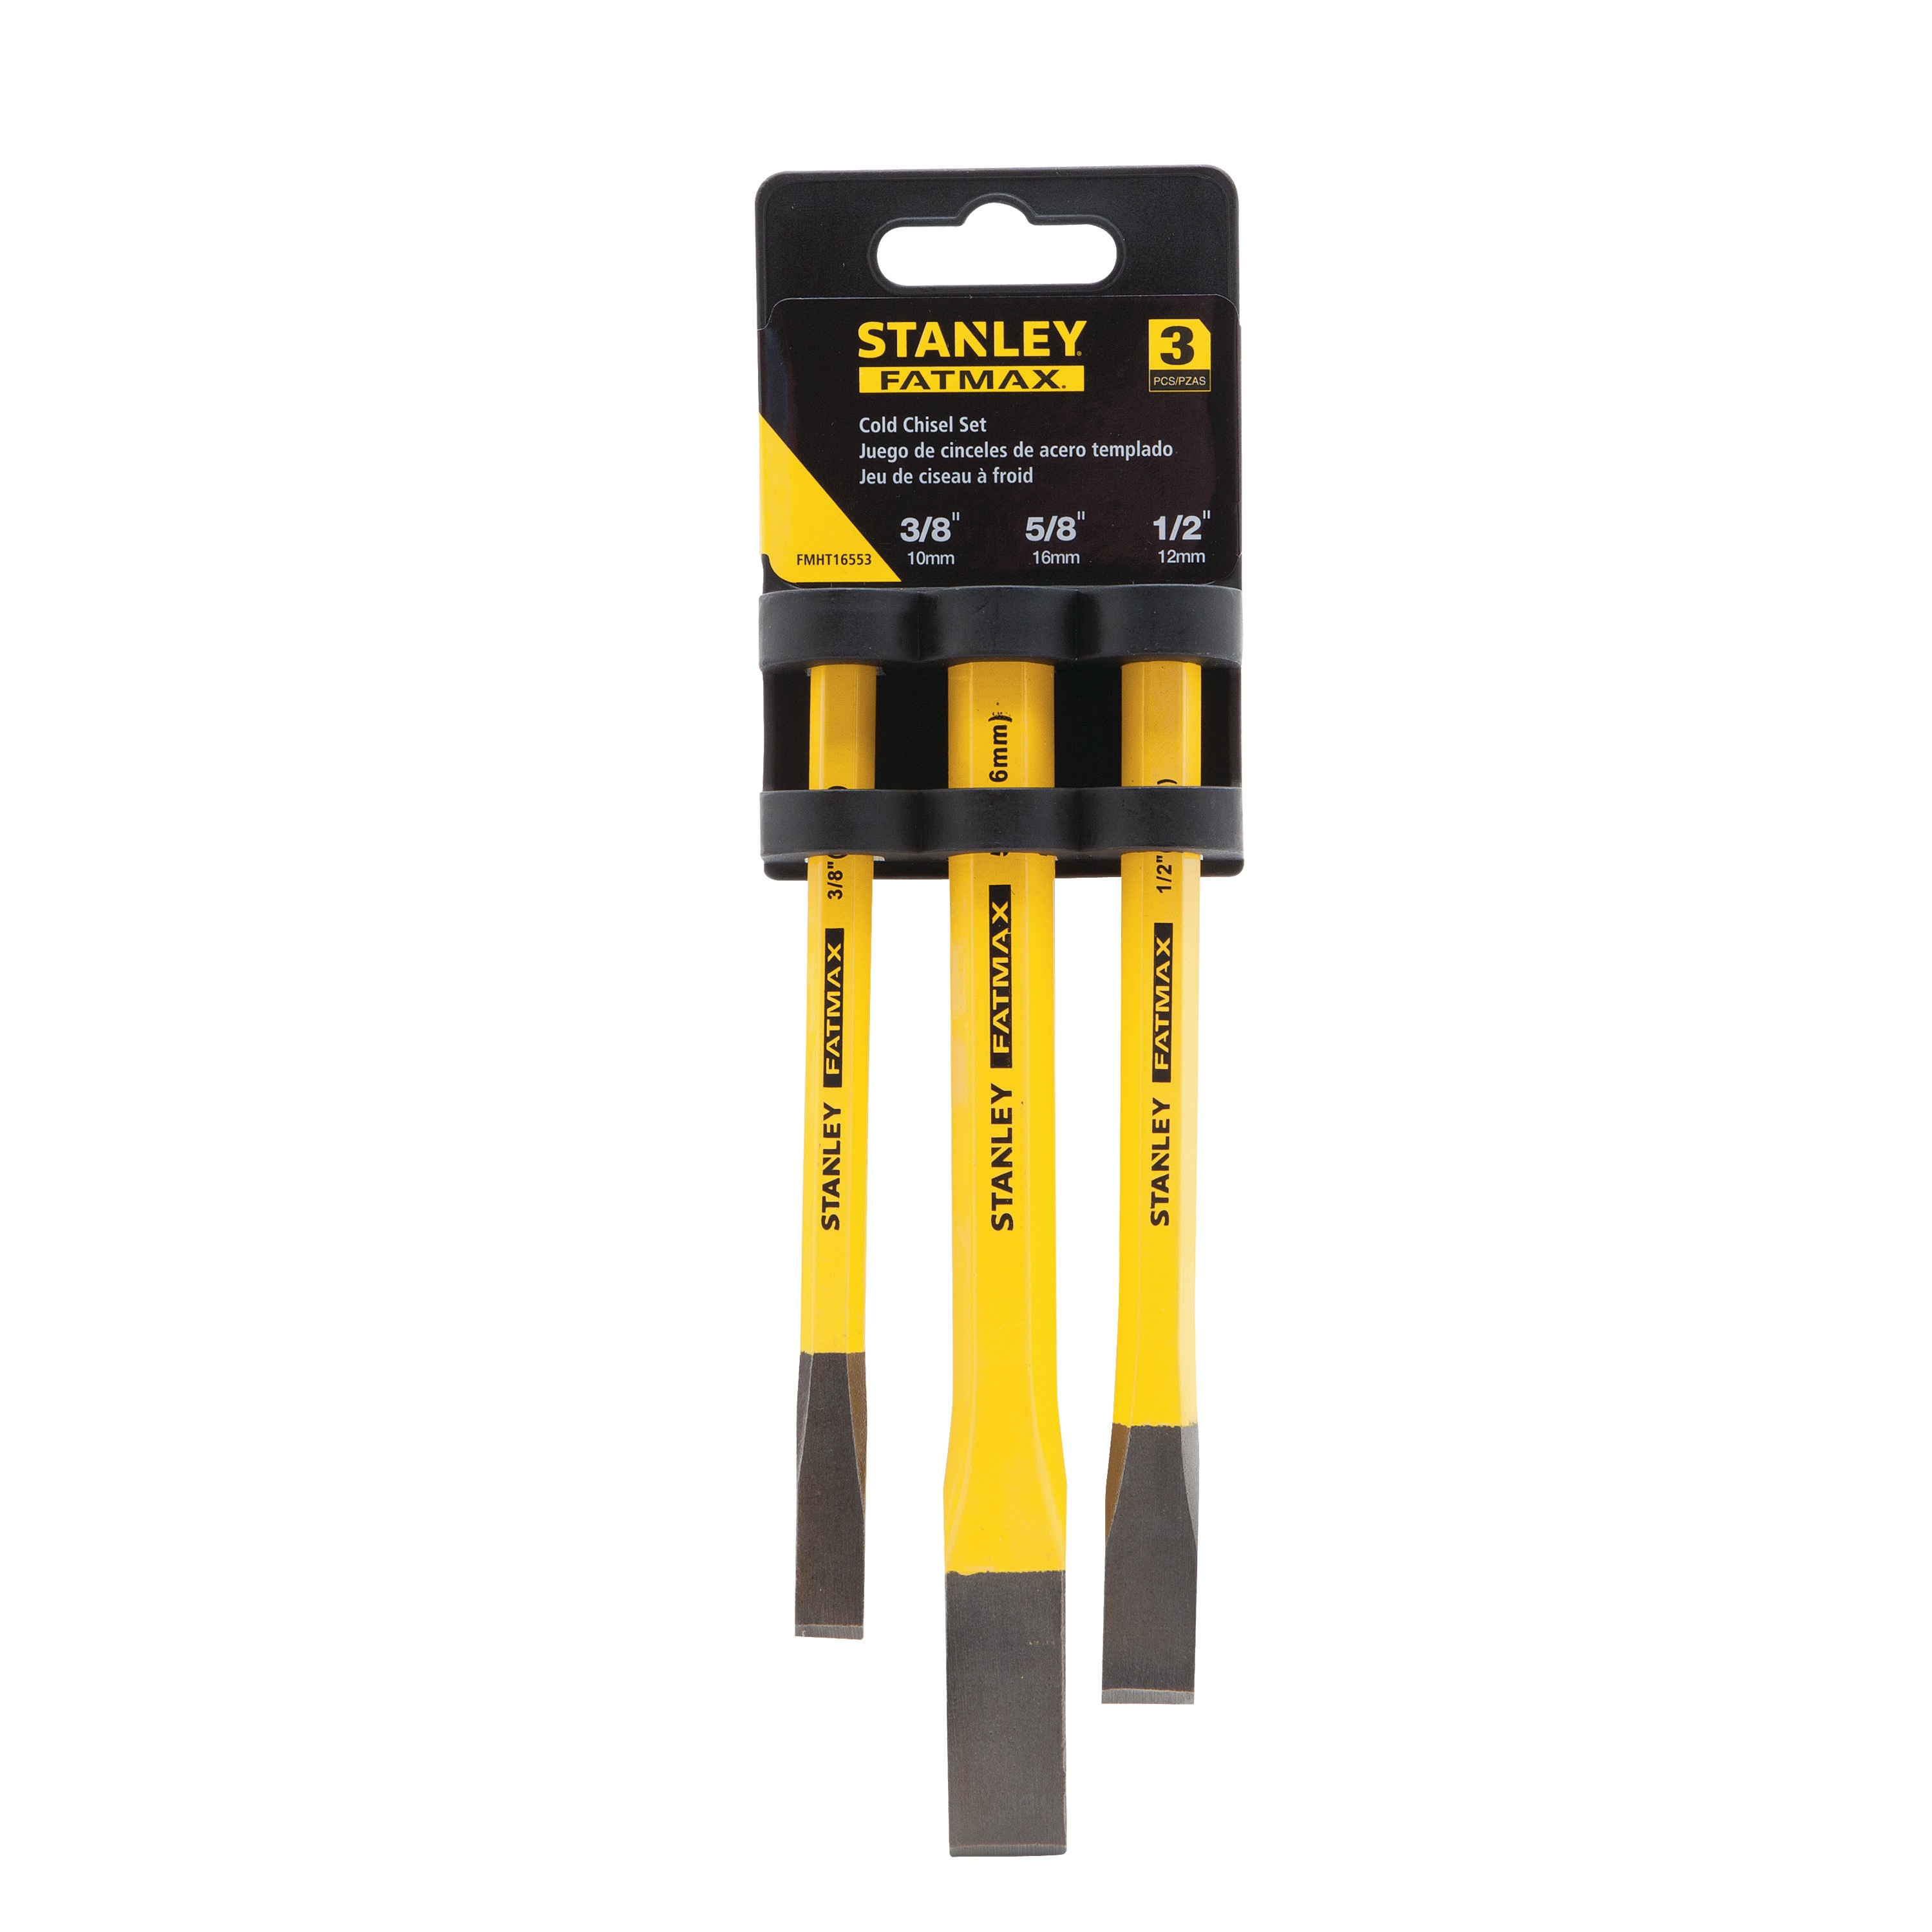 Stanley Tools - 3 pc FATMAX Cold Chisel Set - FMHT16553